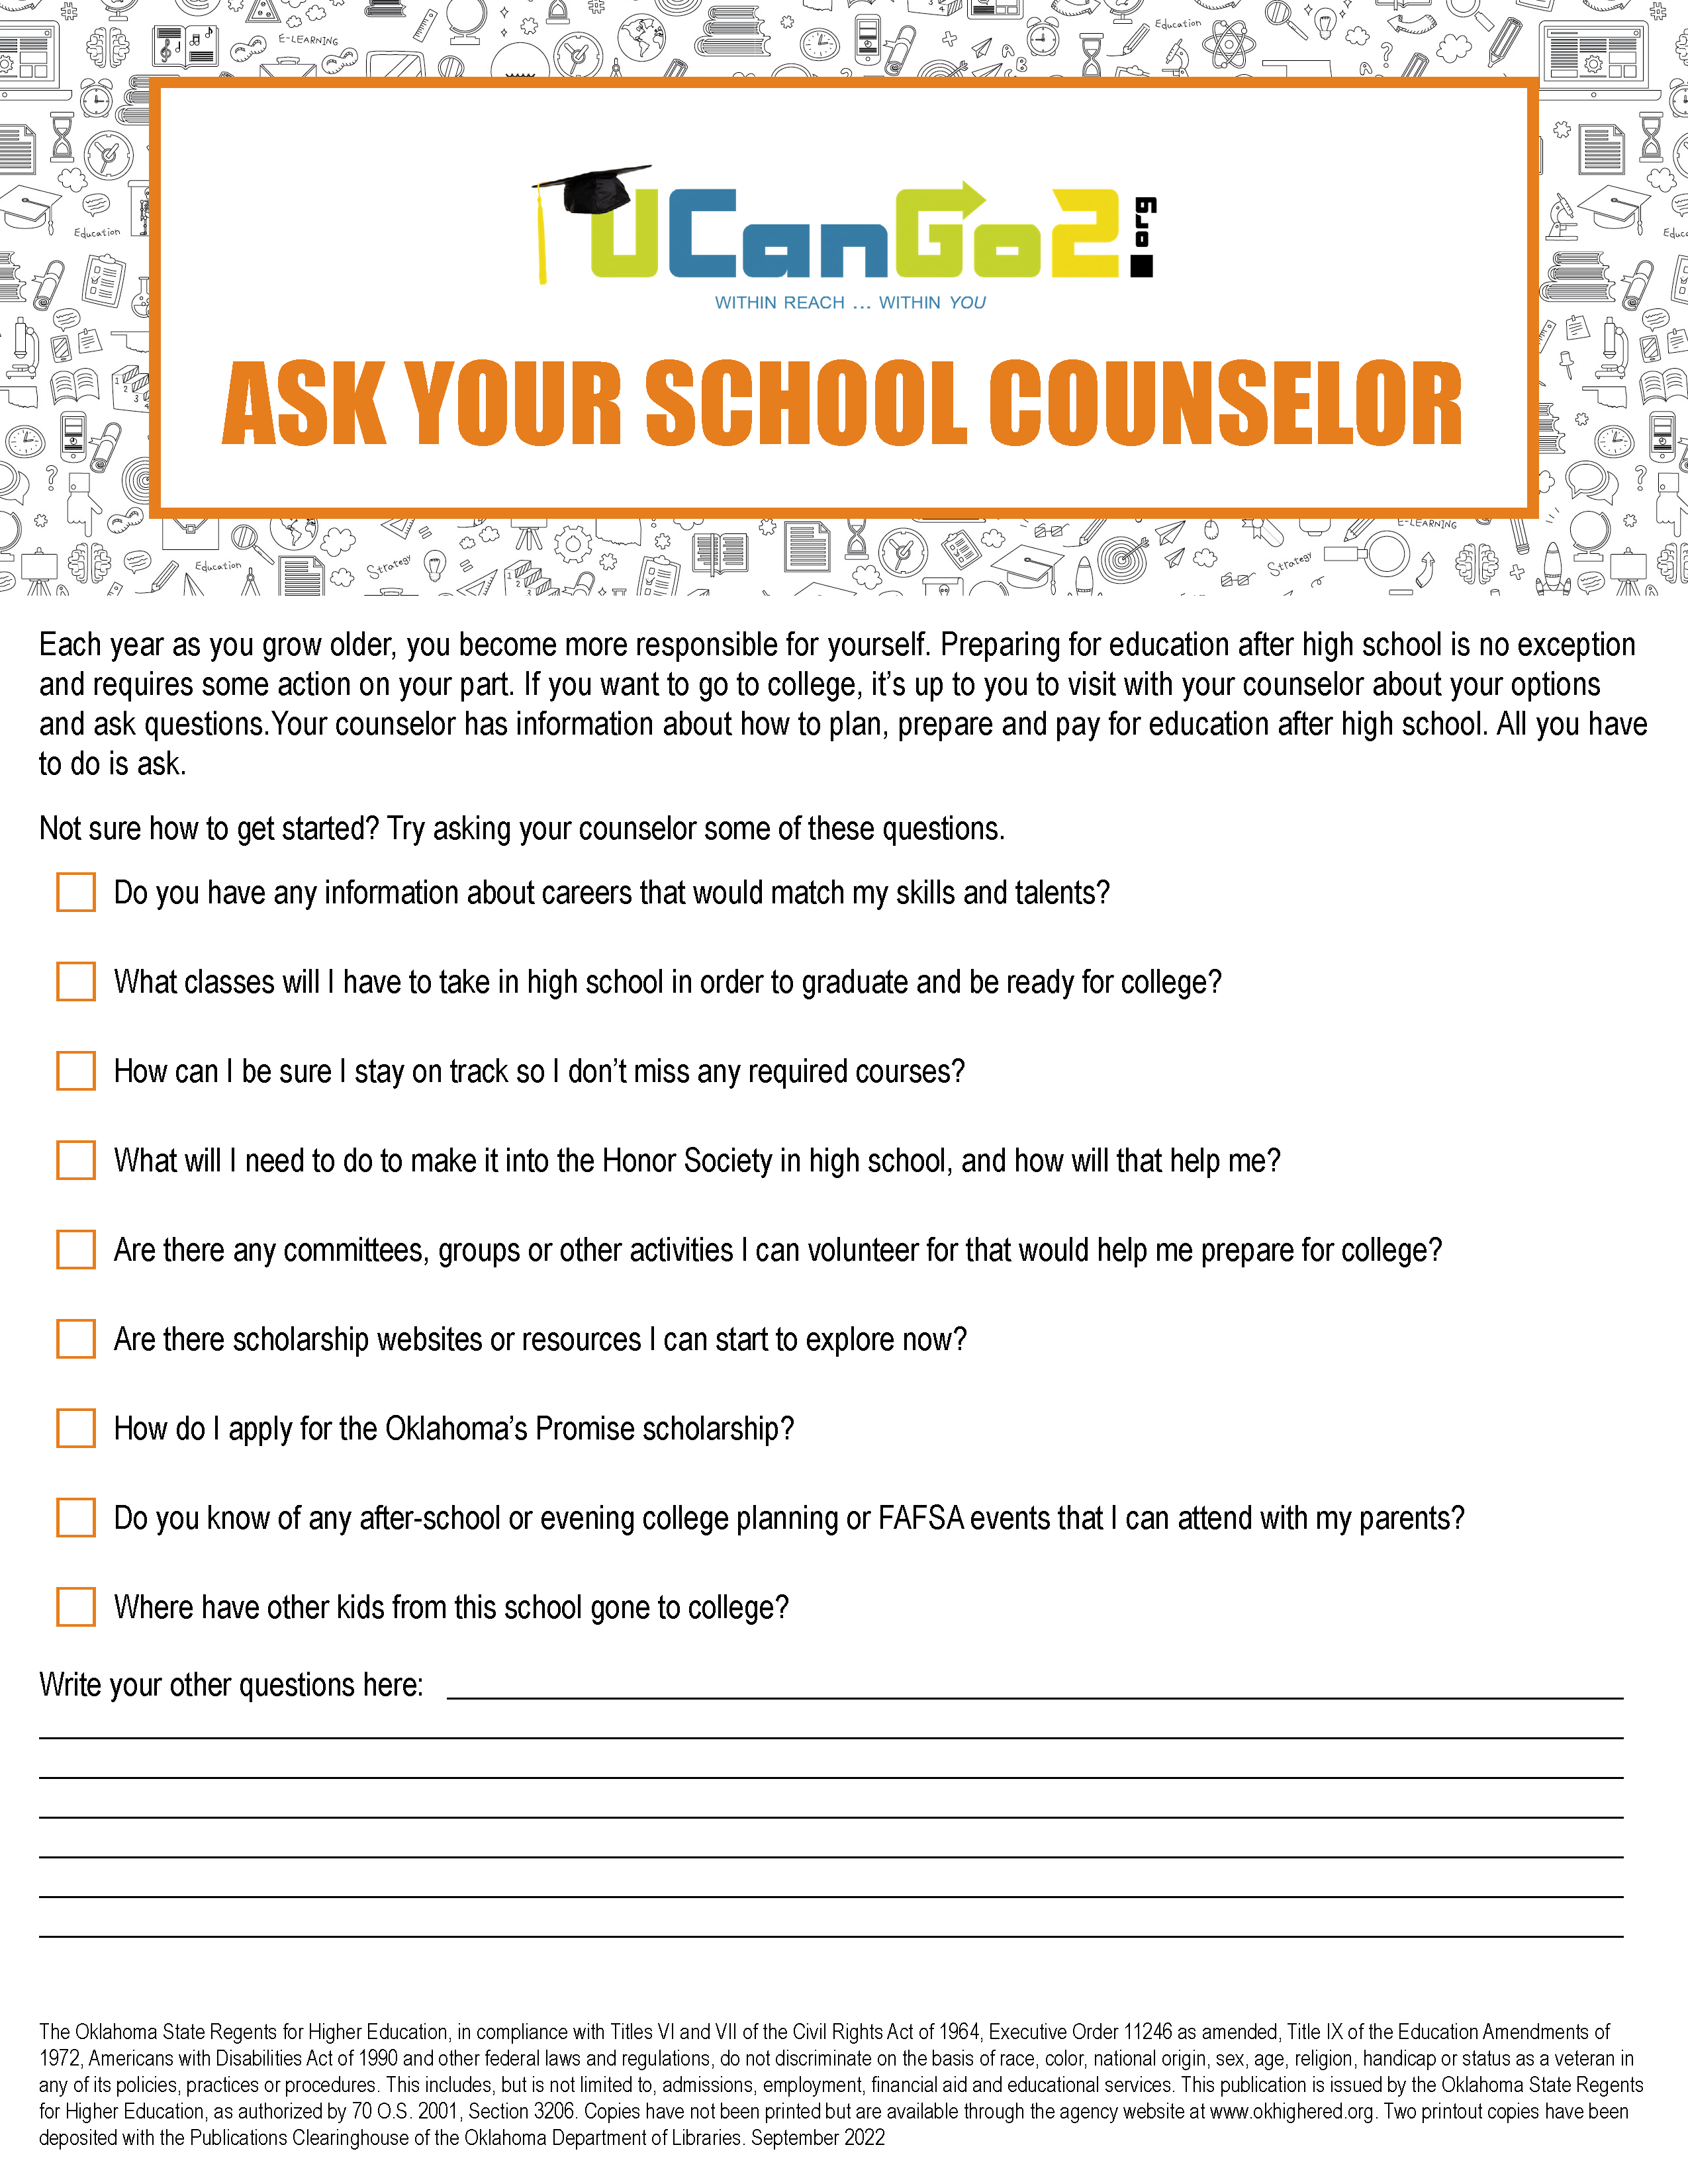 PDF of Ask Your School Counselor Worksheet Opens in a new tab